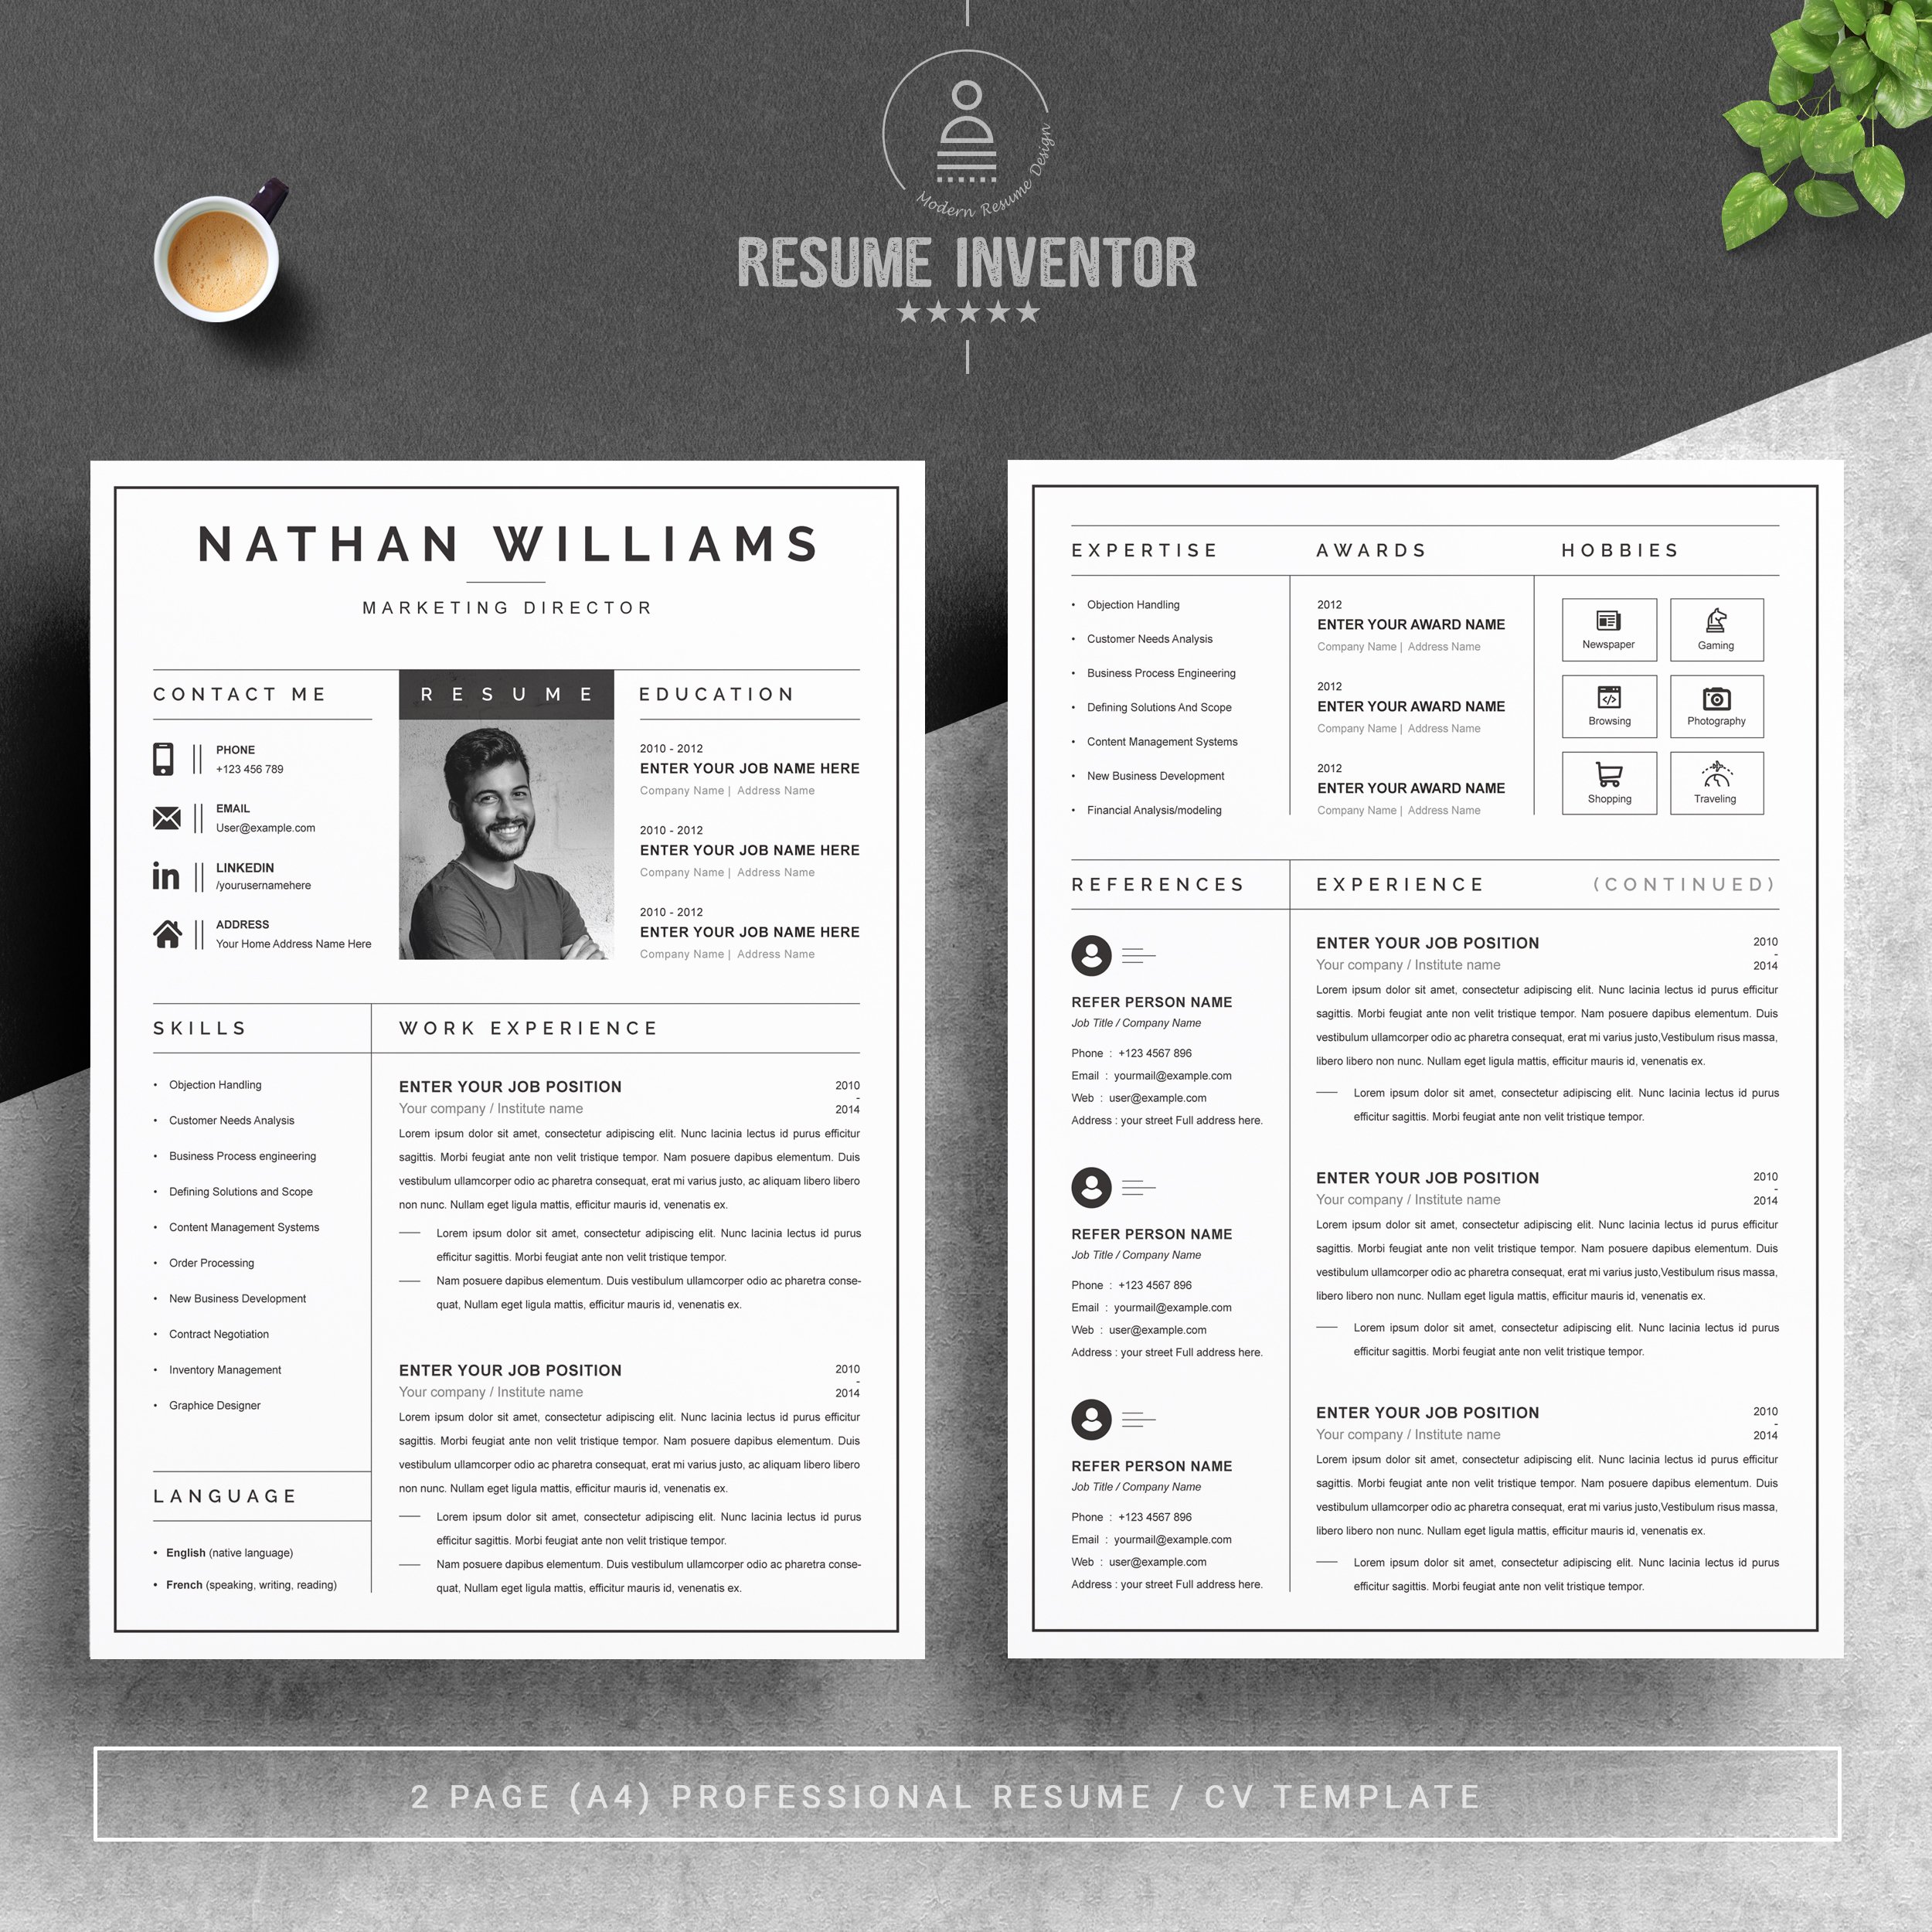 New CV Template Download preview image.